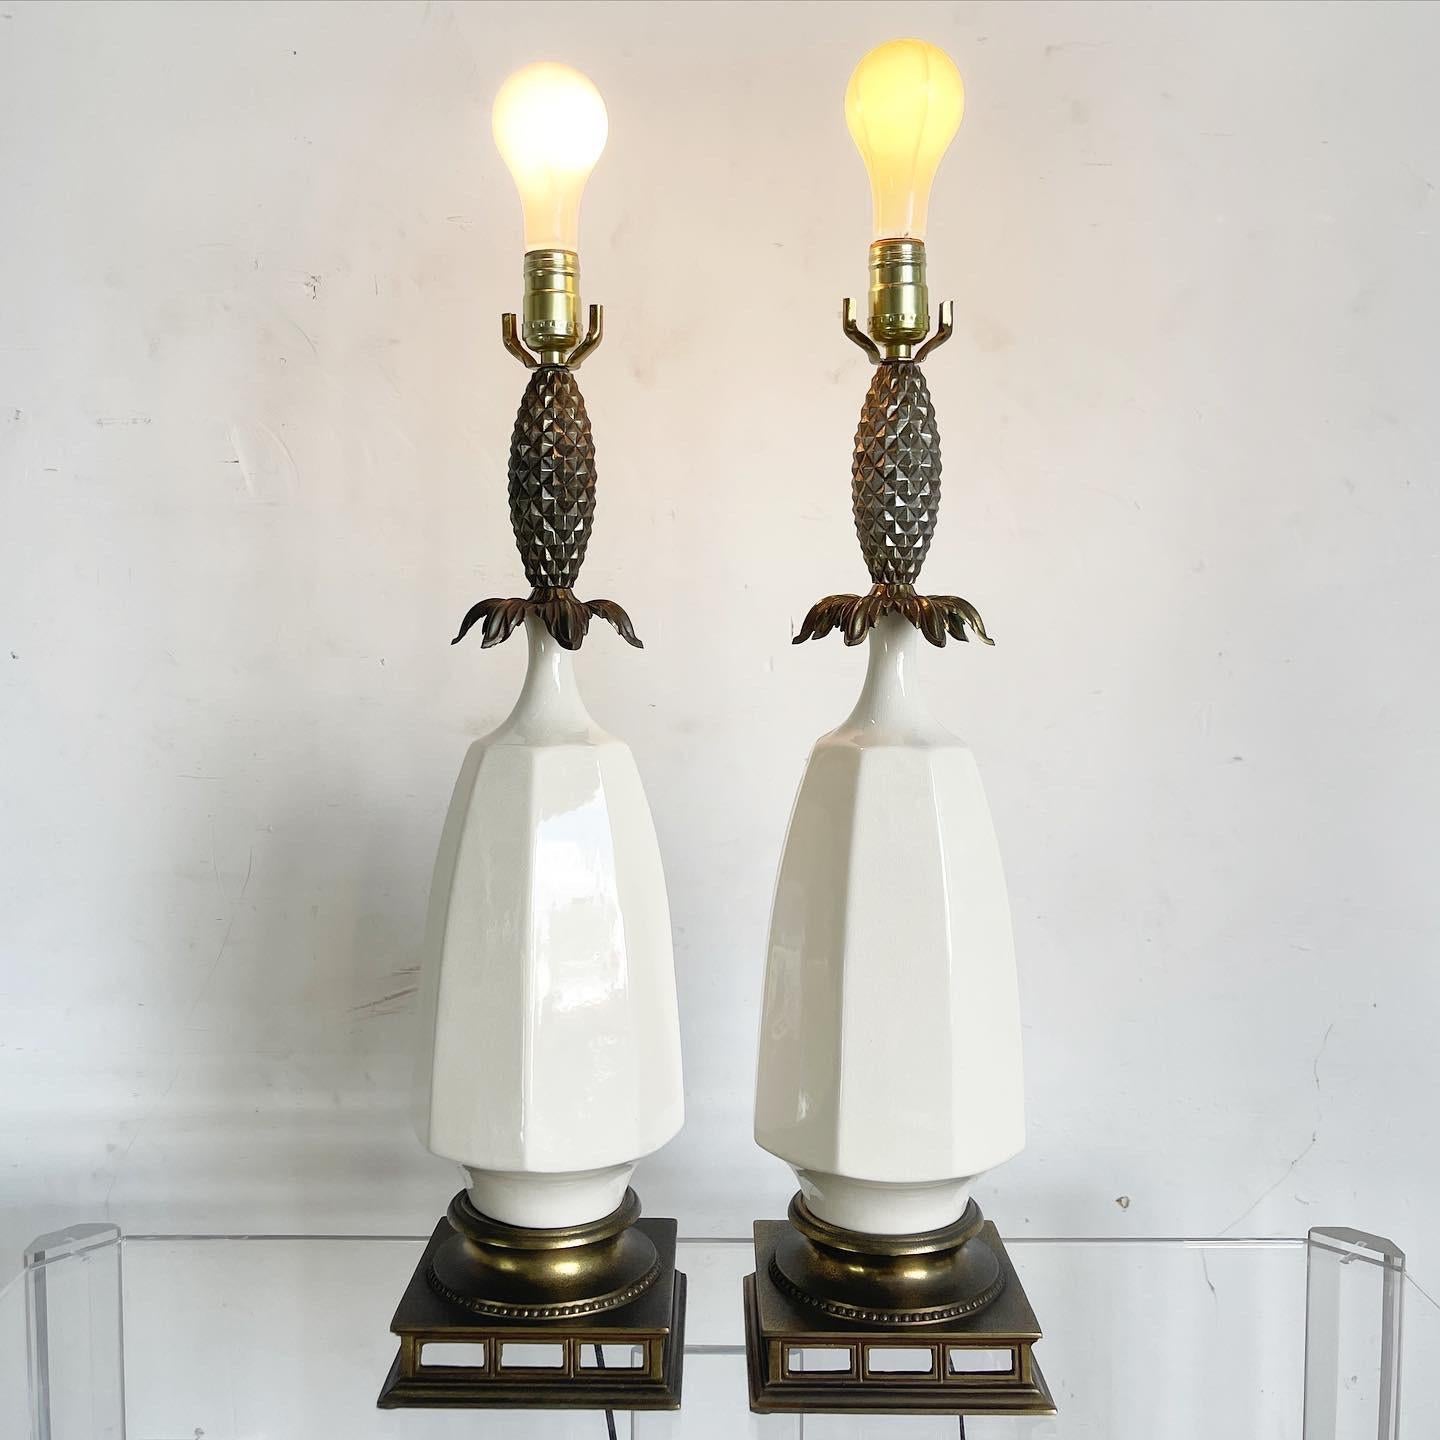 American Hollywood Regency Creams Ceramic and Brass Pineapple Table Lamps - a Pair For Sale